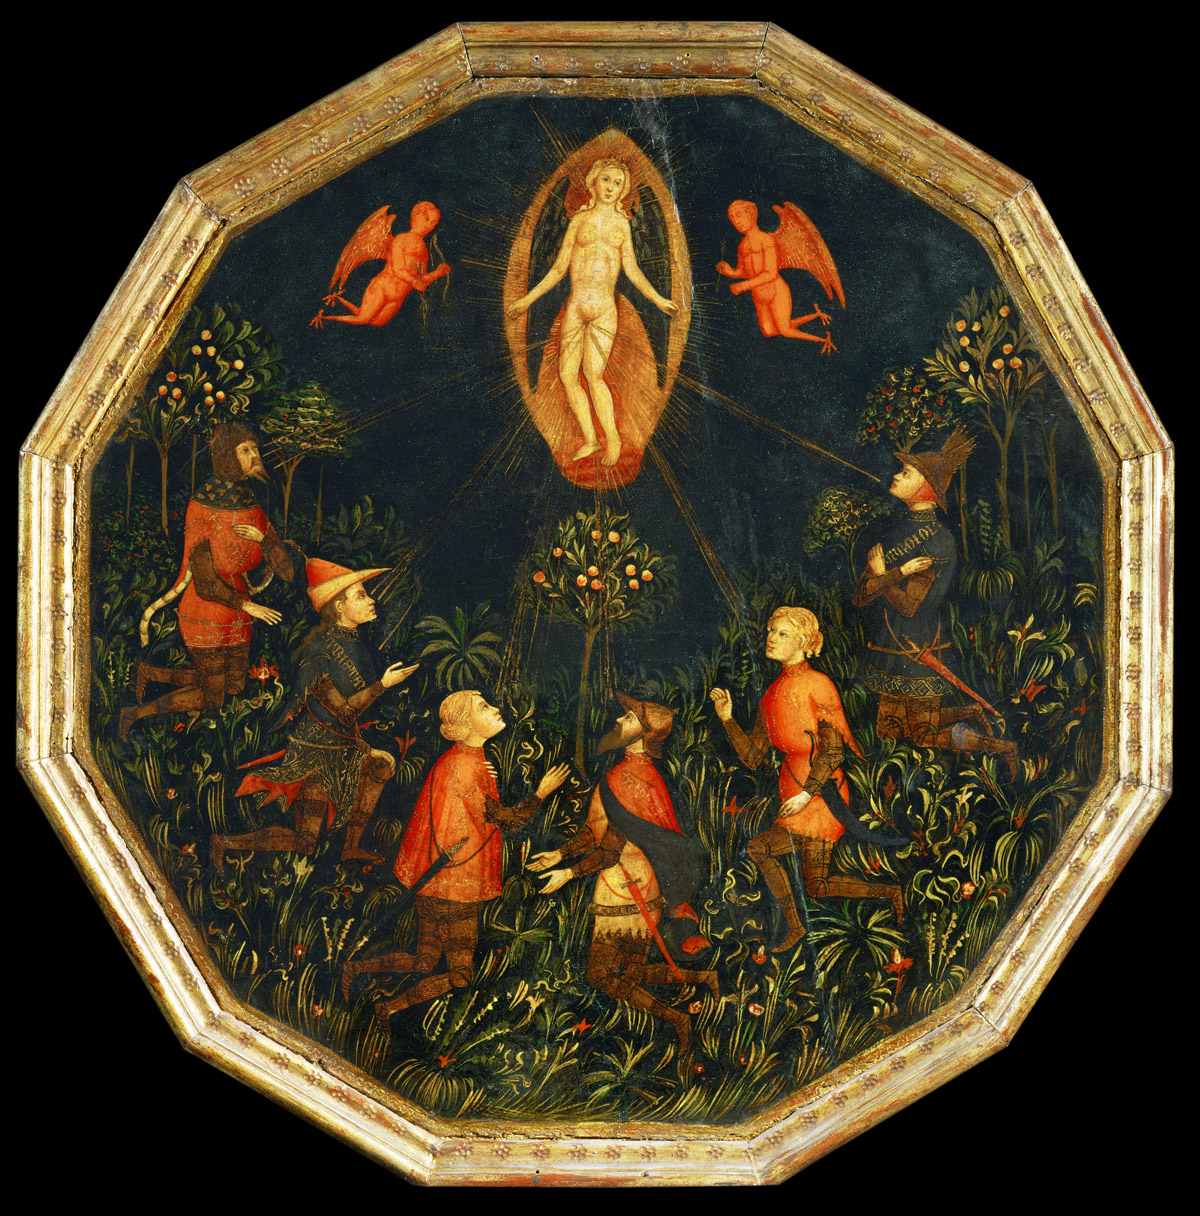 Birth tray depicting Venus being worshipped by Achilles, Tristan, Lancelot, Samson, Paris, and Troillus. Attributed to Master of Charles of Durazzo, c. 1400. Louvre Museum, Paris. 